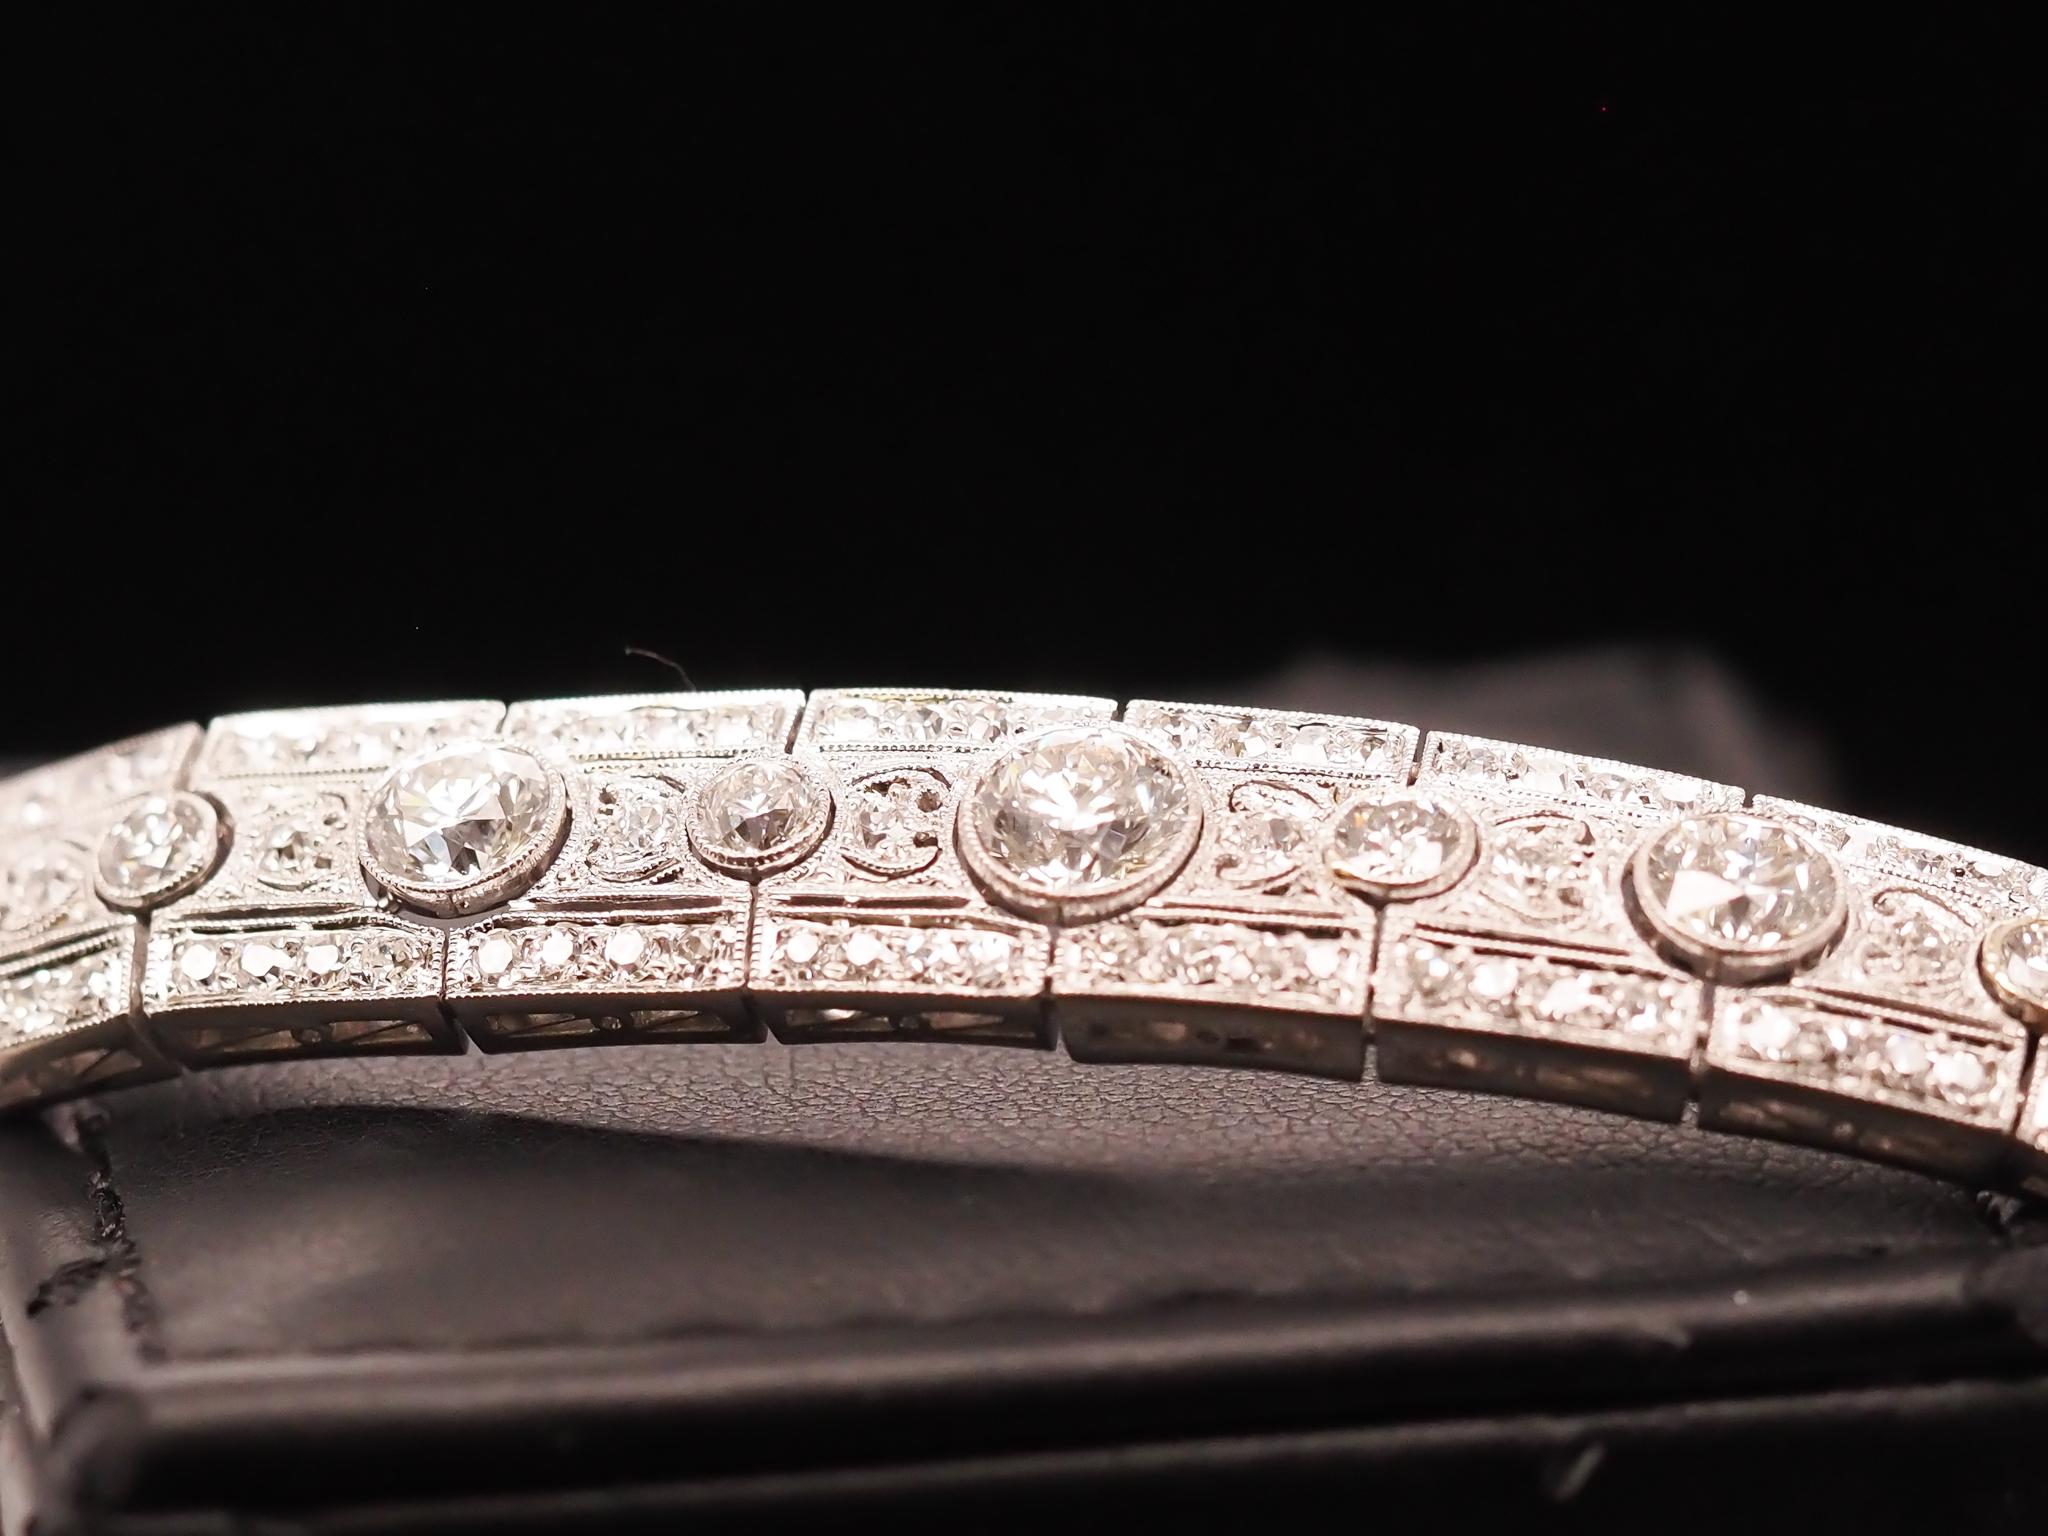 Year: 1920s

Item Details:
Metal Type: Platinum [Hallmarked, and Tested]
Weight: 33.2 grams (All Items Total)

Stone Details:
Type: Diamond (natural)
Weight: 10.00ct total weight
Cut: Old European Brilliant
Color: F-G
Clarity: VS

Bracelet Length